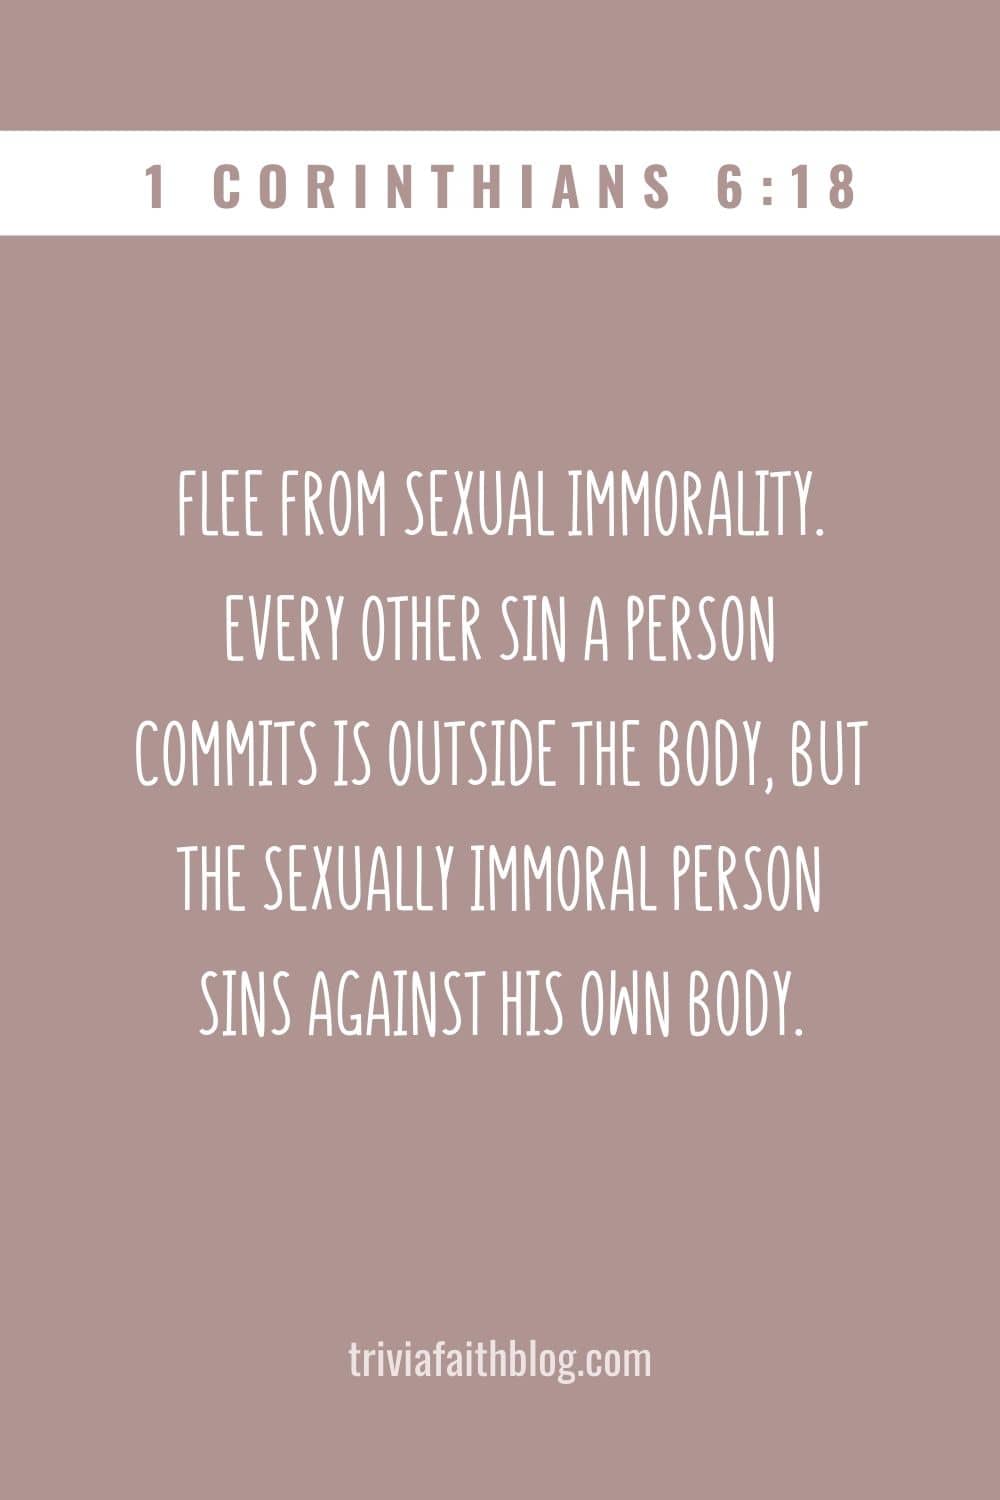 Flee from sexual immorality